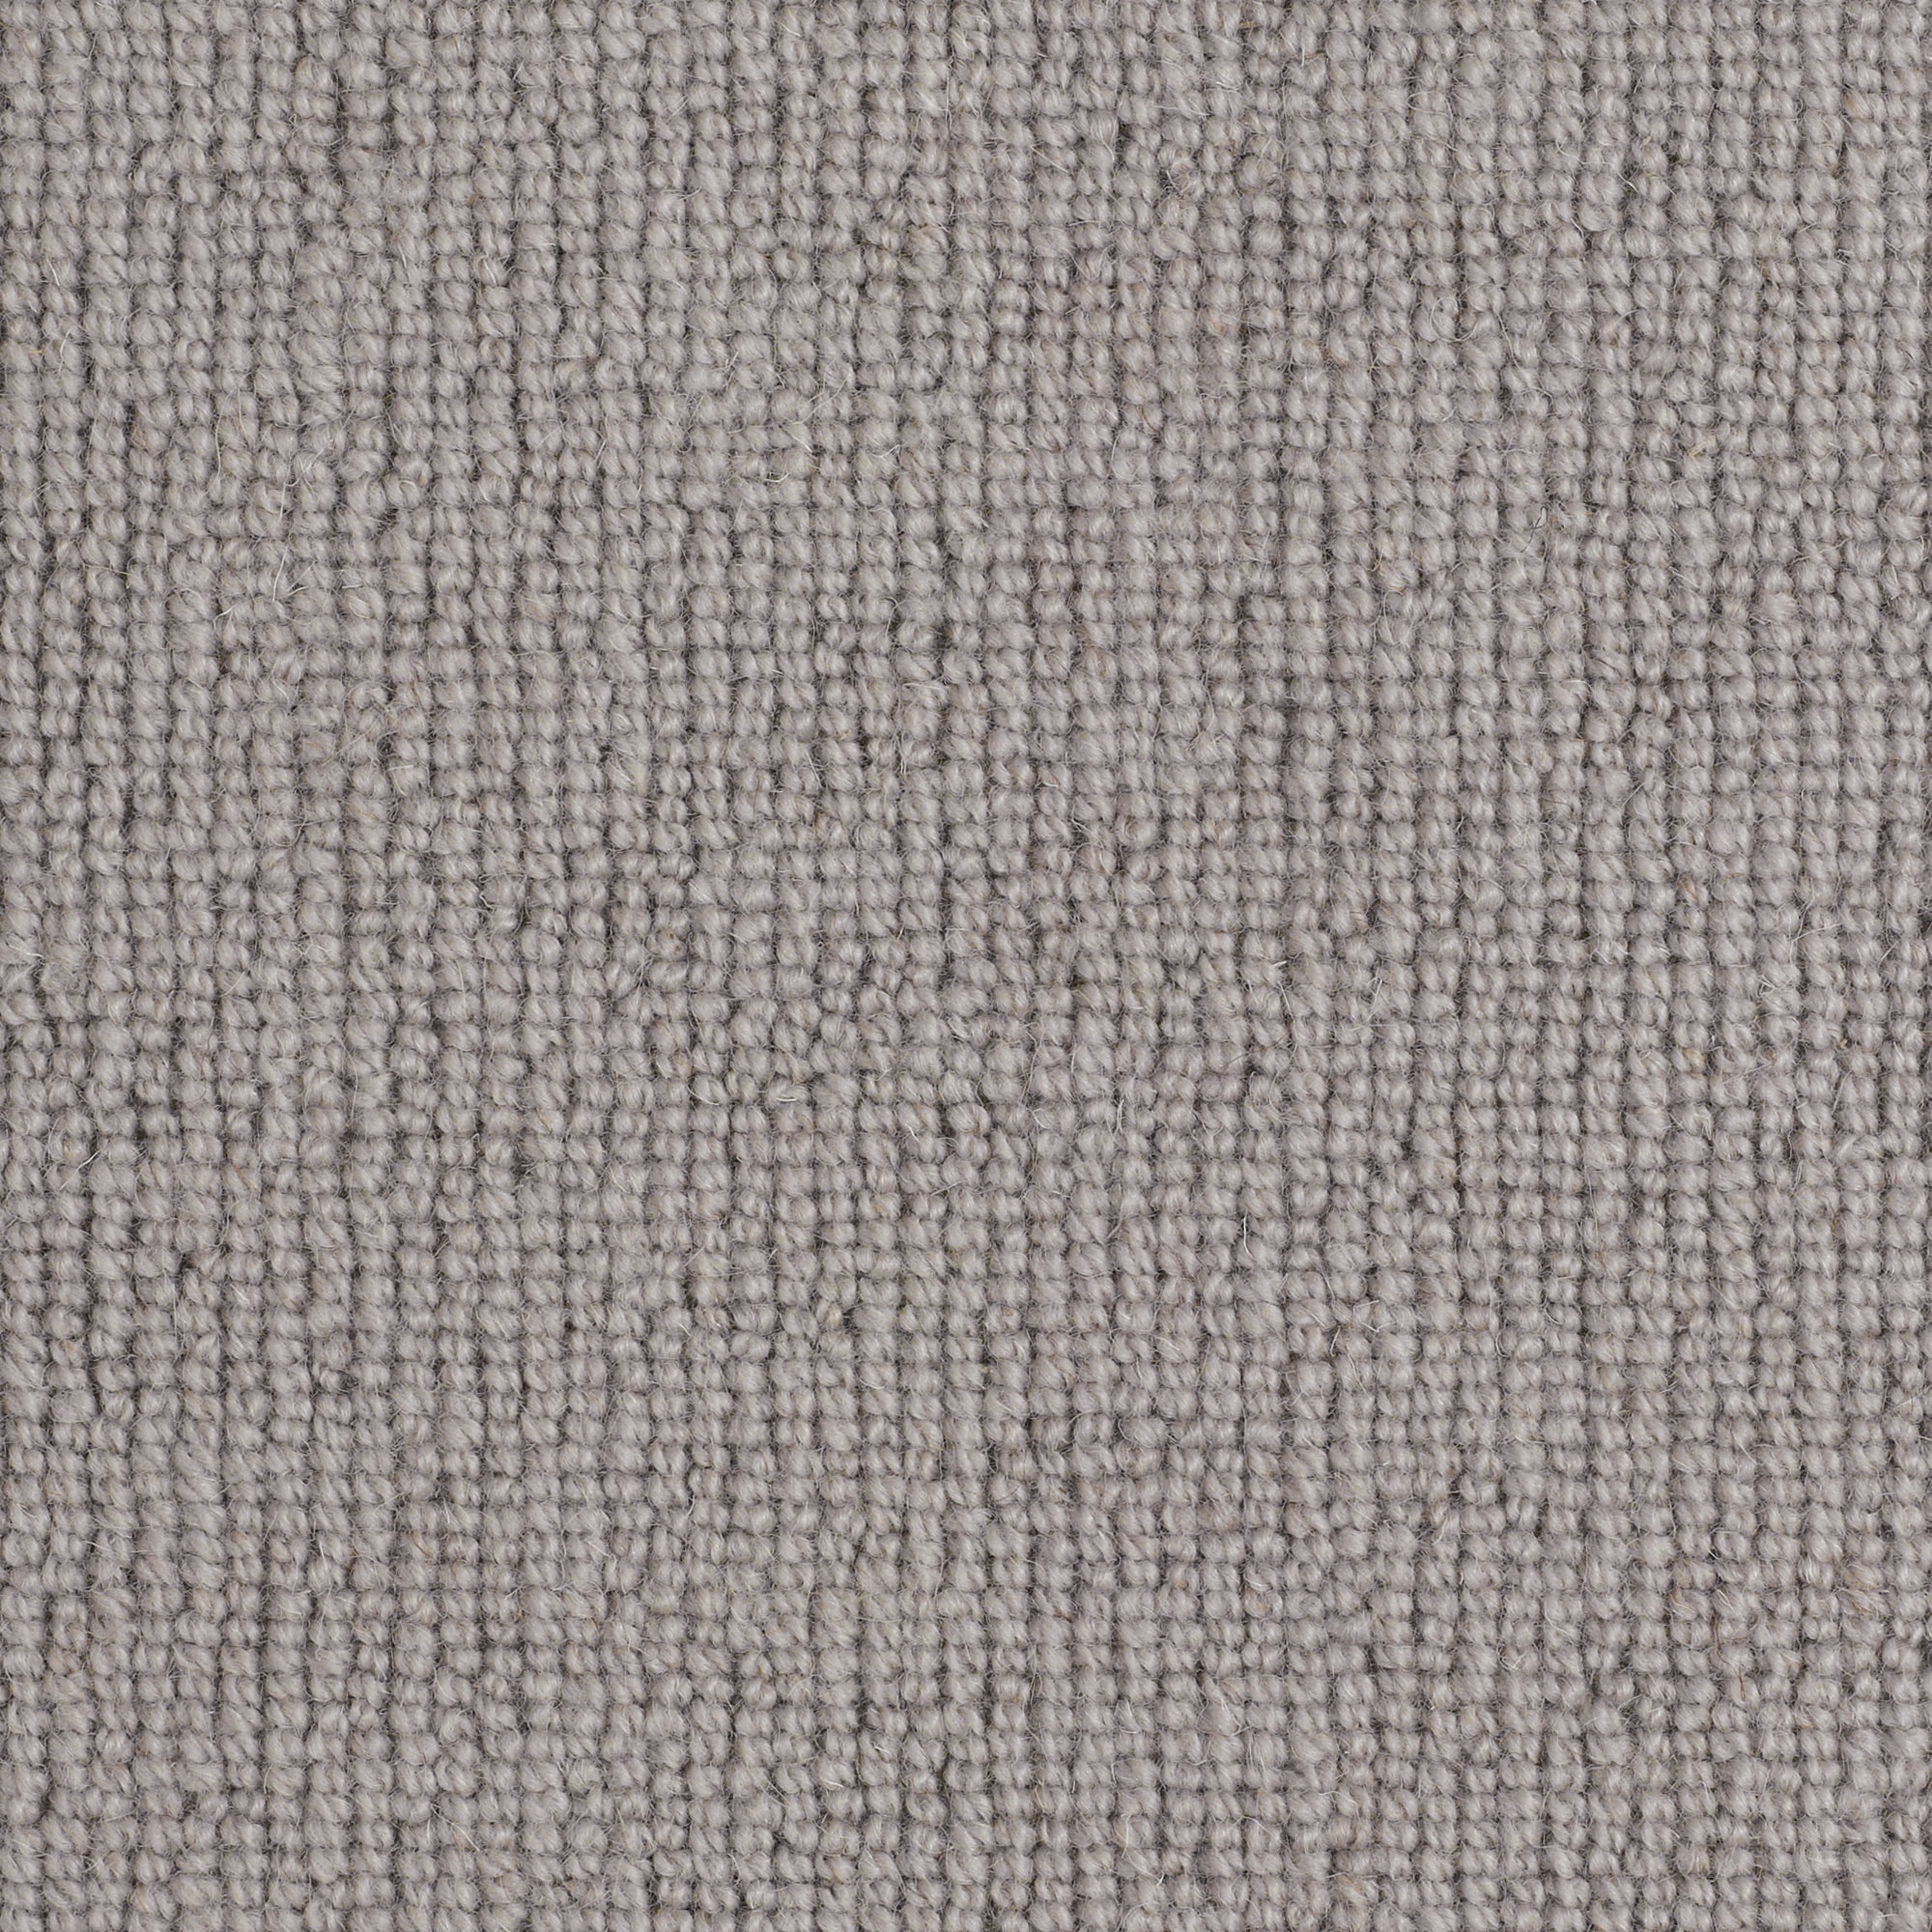 Scafell: Autumn Ling - 100% Wool Carpet